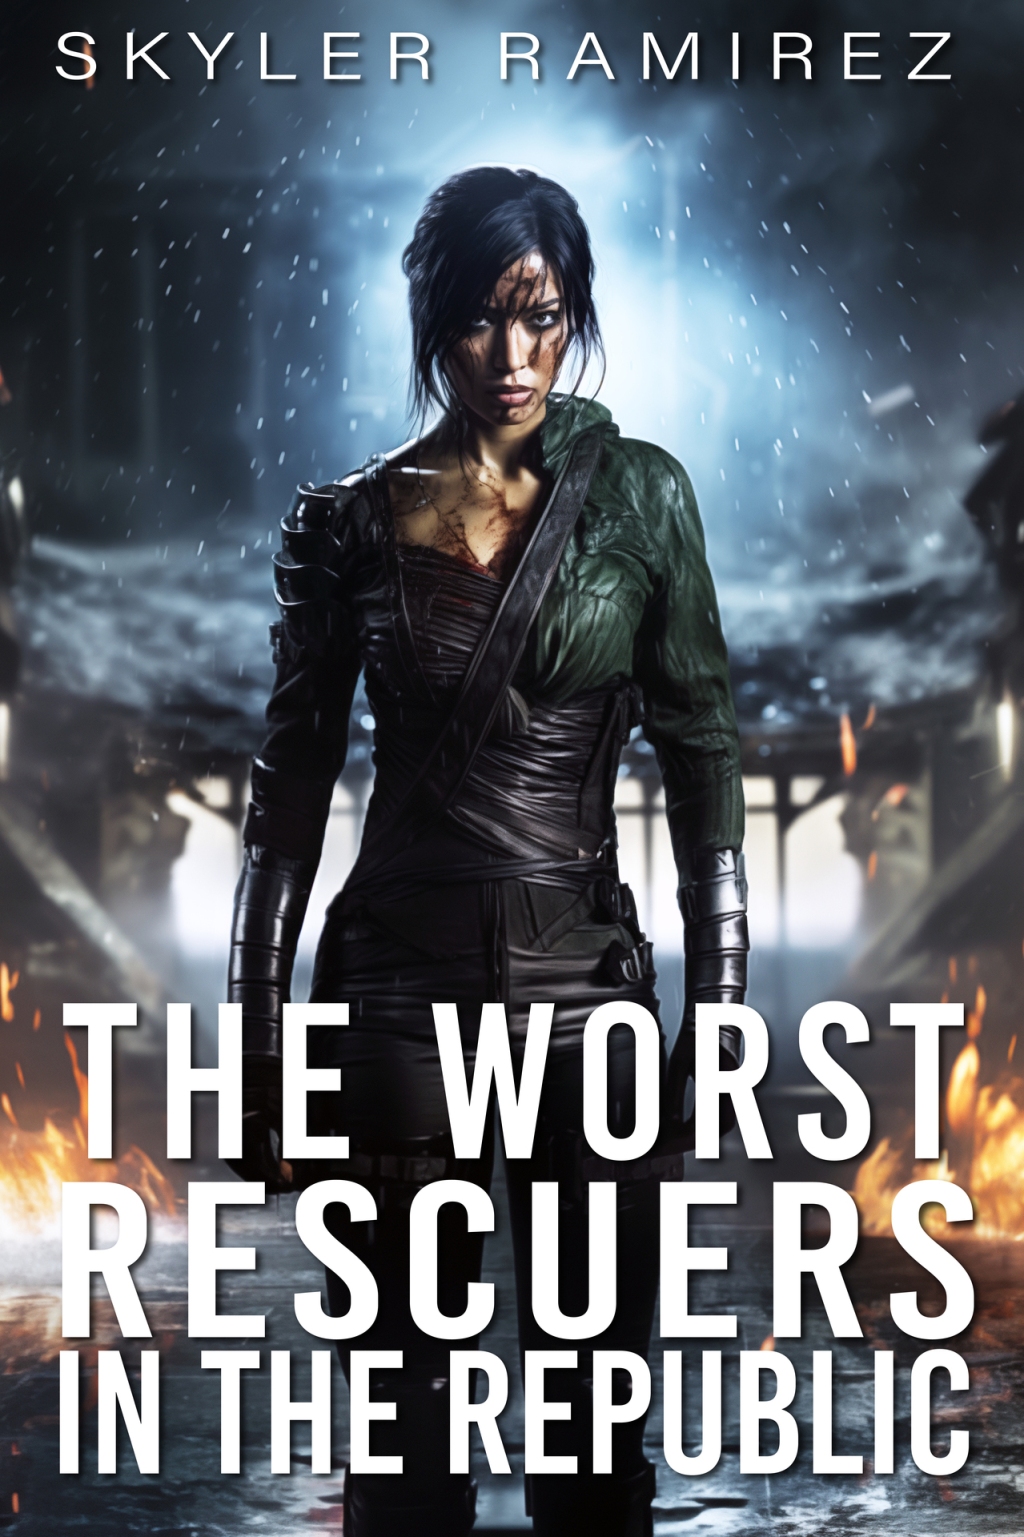 The Worst Rescuers in the Republic – Enjoyable space adventure.